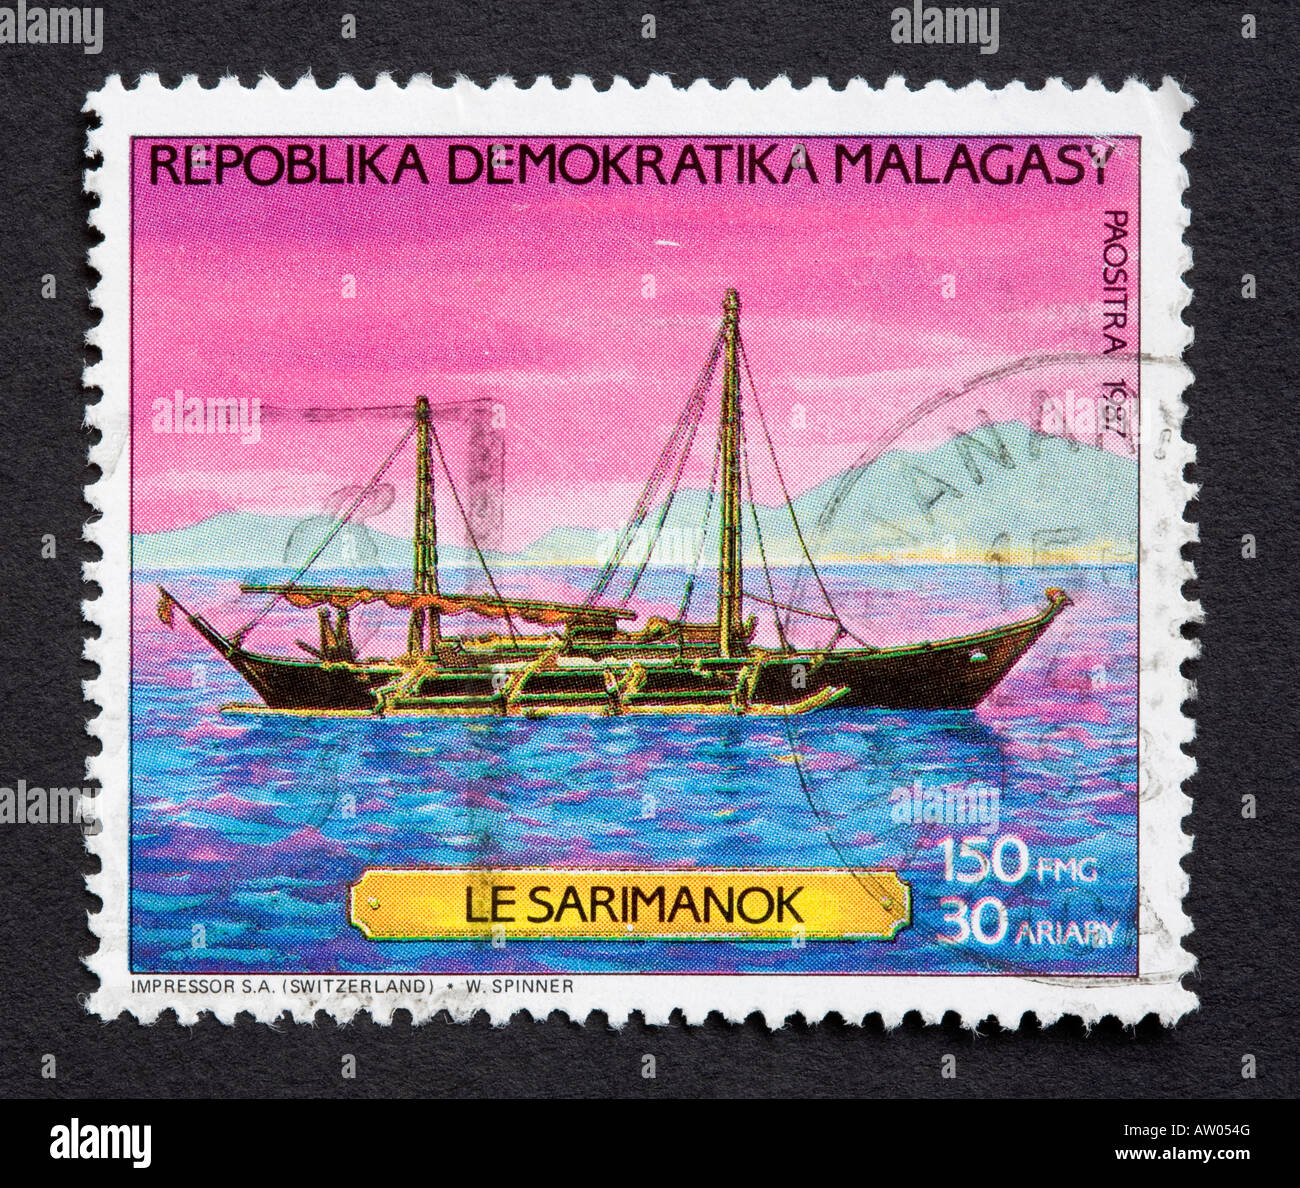 Malagasy postage stamp Stock Photo